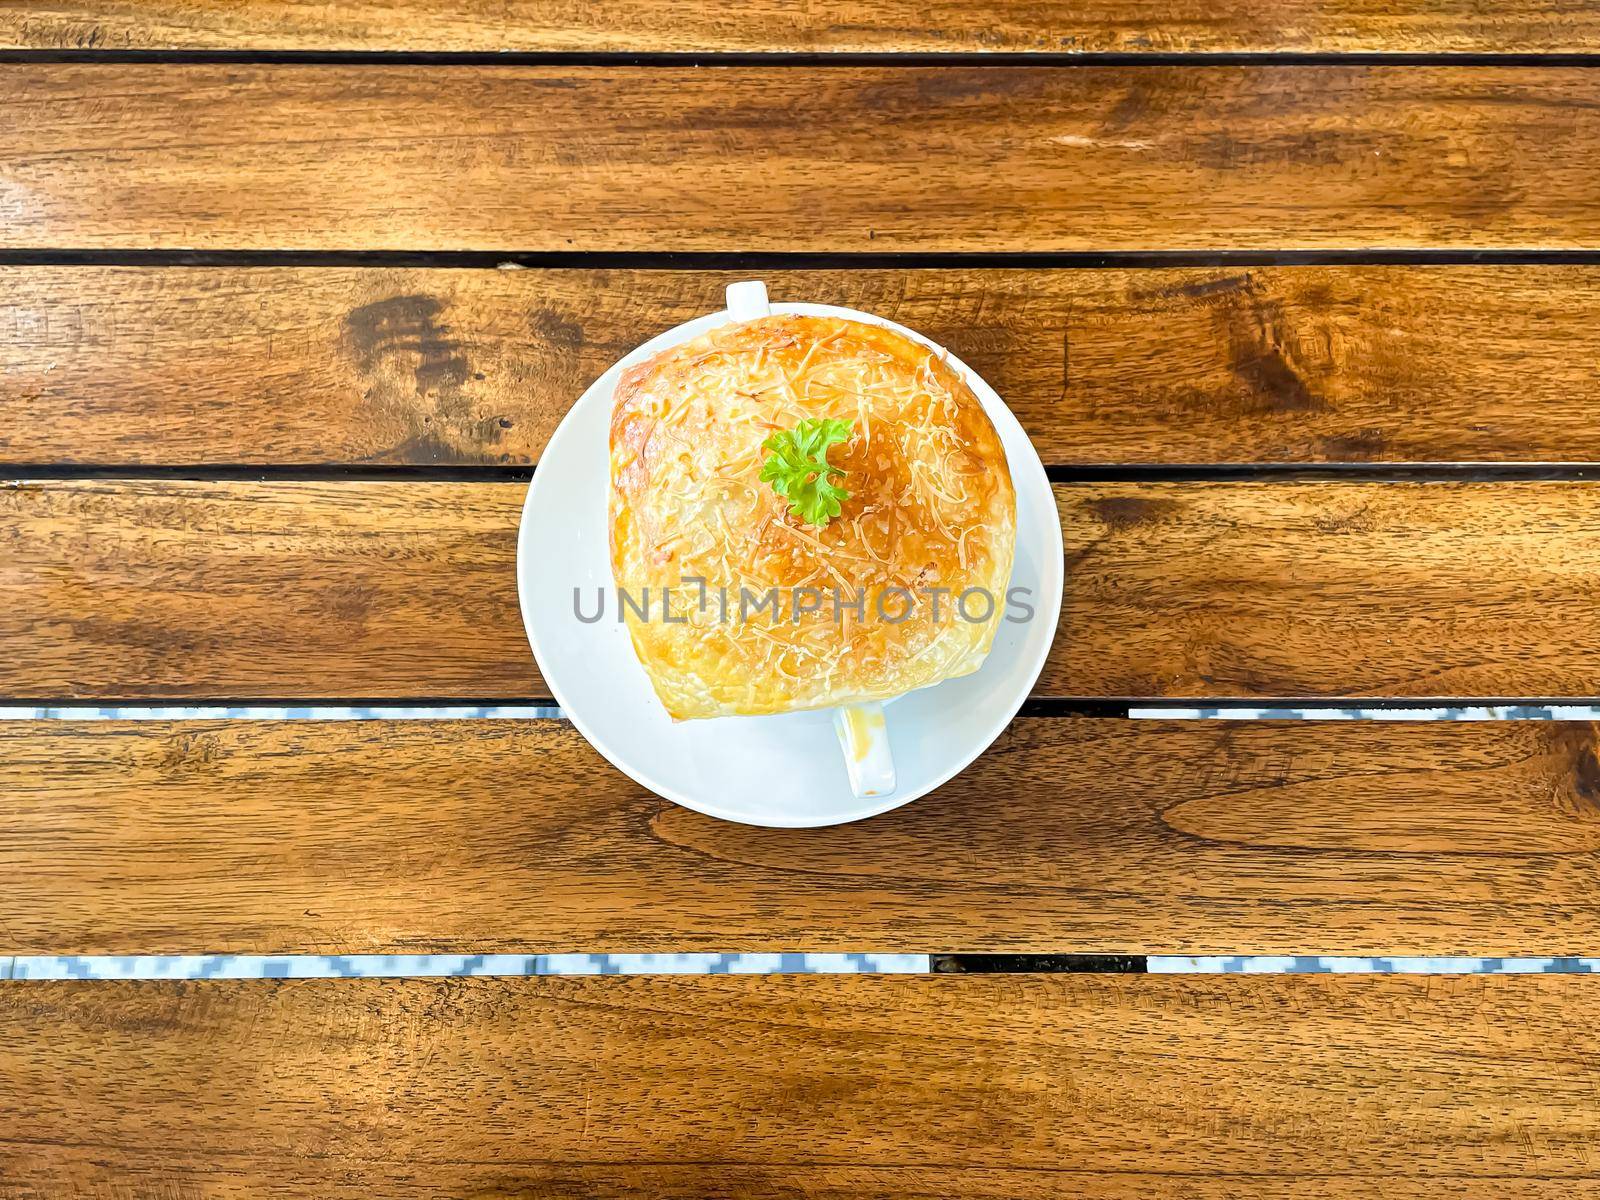 Chicken pot pie soup , zuppa toscana or bread or Tuscan or Minestra Pane or Zuppa soup. Made from kale, zucchini, beans, potatoes, celery, carrots, onion, tomato pulp, extra virgin olive oil, chili and chicken or bacon.